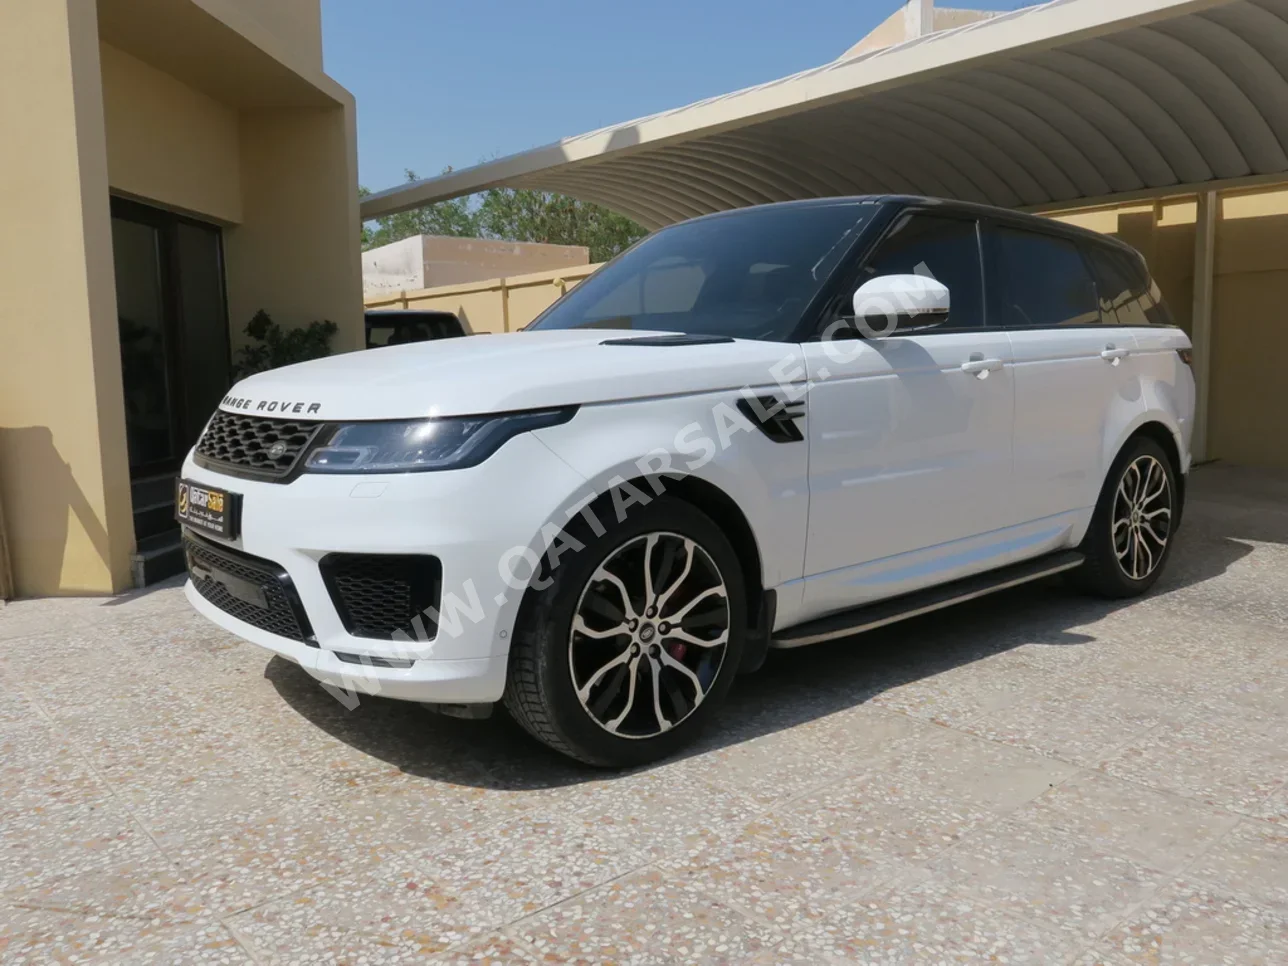 Land Rover  Range Rover  Sport Super charged  2019  Automatic  70,000 Km  8 Cylinder  Four Wheel Drive (4WD)  SUV  White  With Warranty